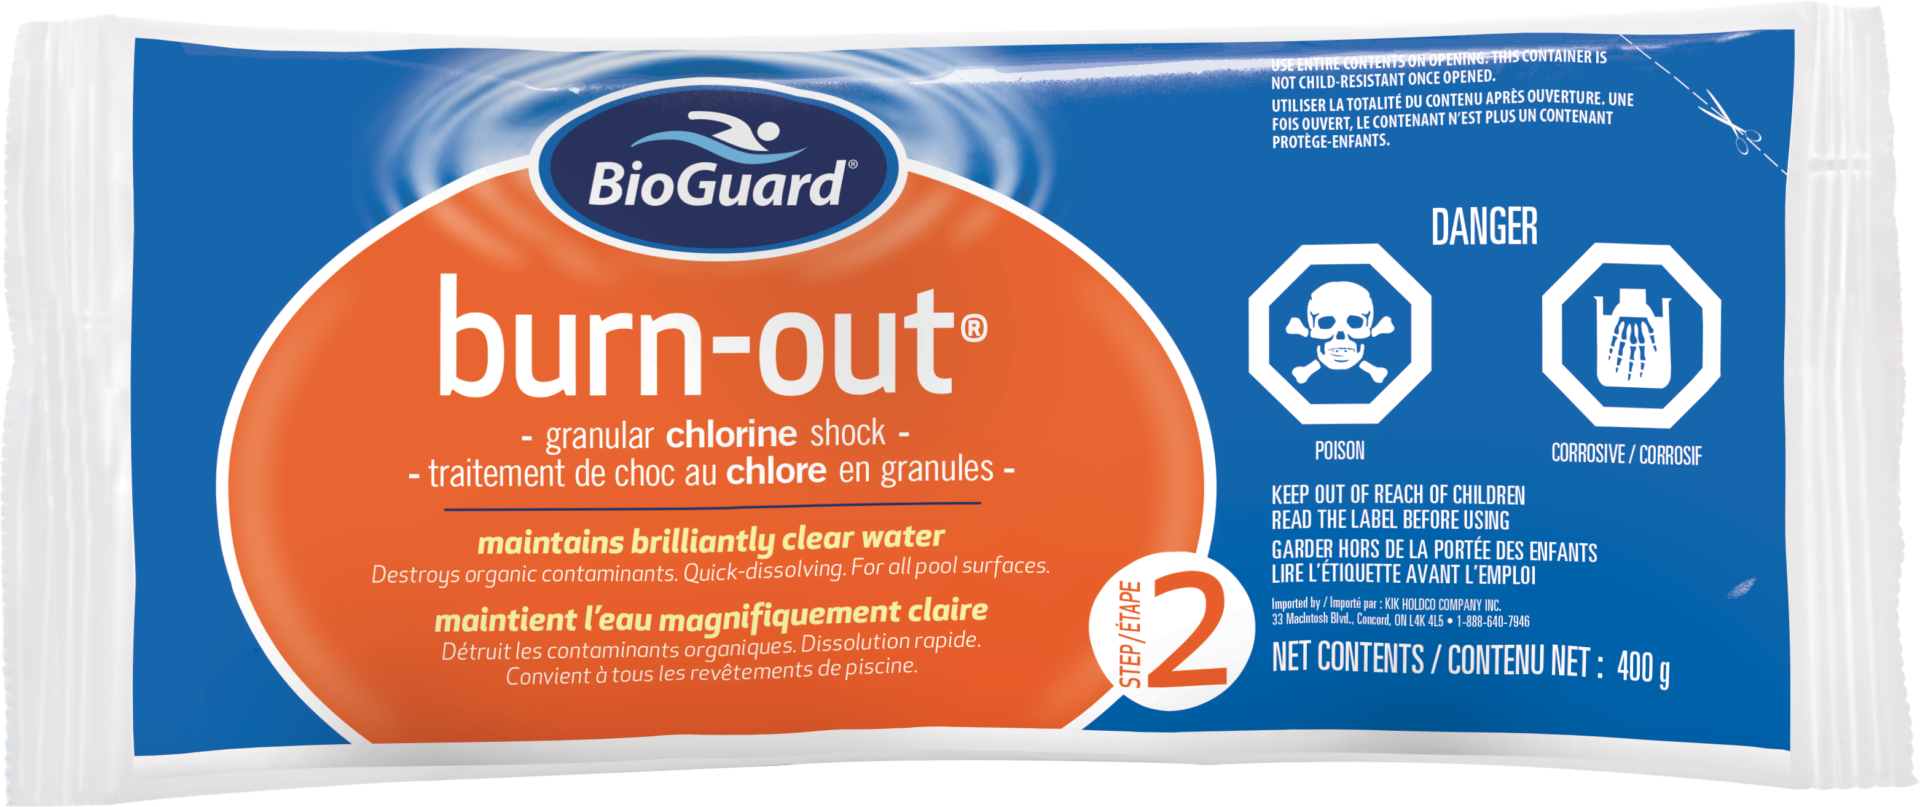 BioGuard Burn Out 400g 1 - BURN OUT (CASE OF 12X400g)